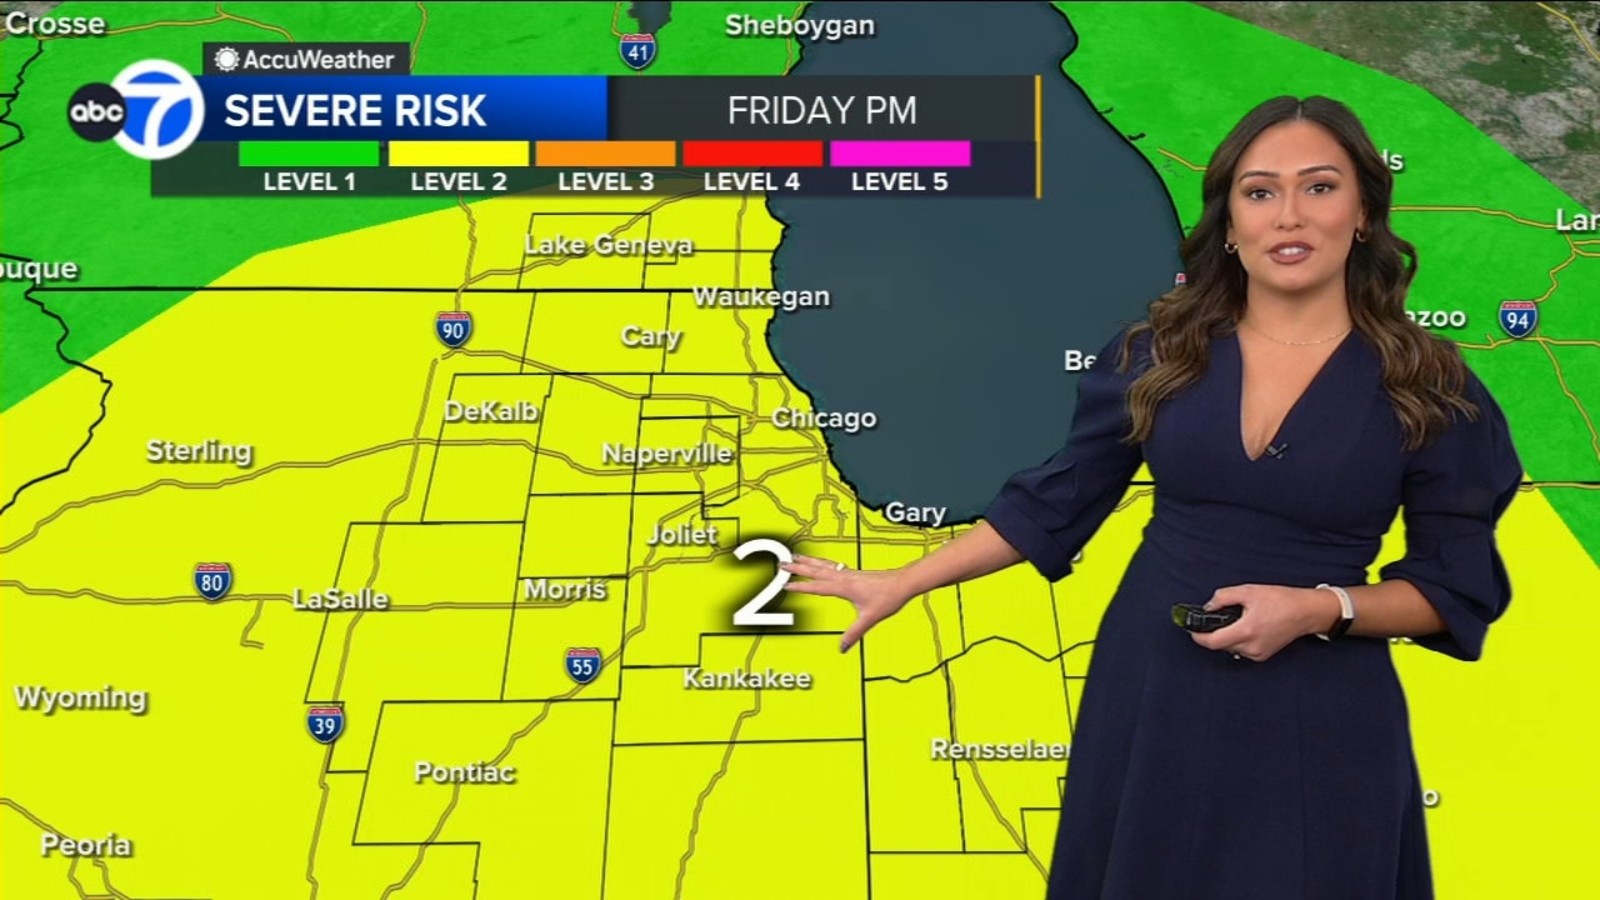 Chicago weather forecast includes threat of high winds, storms Friday